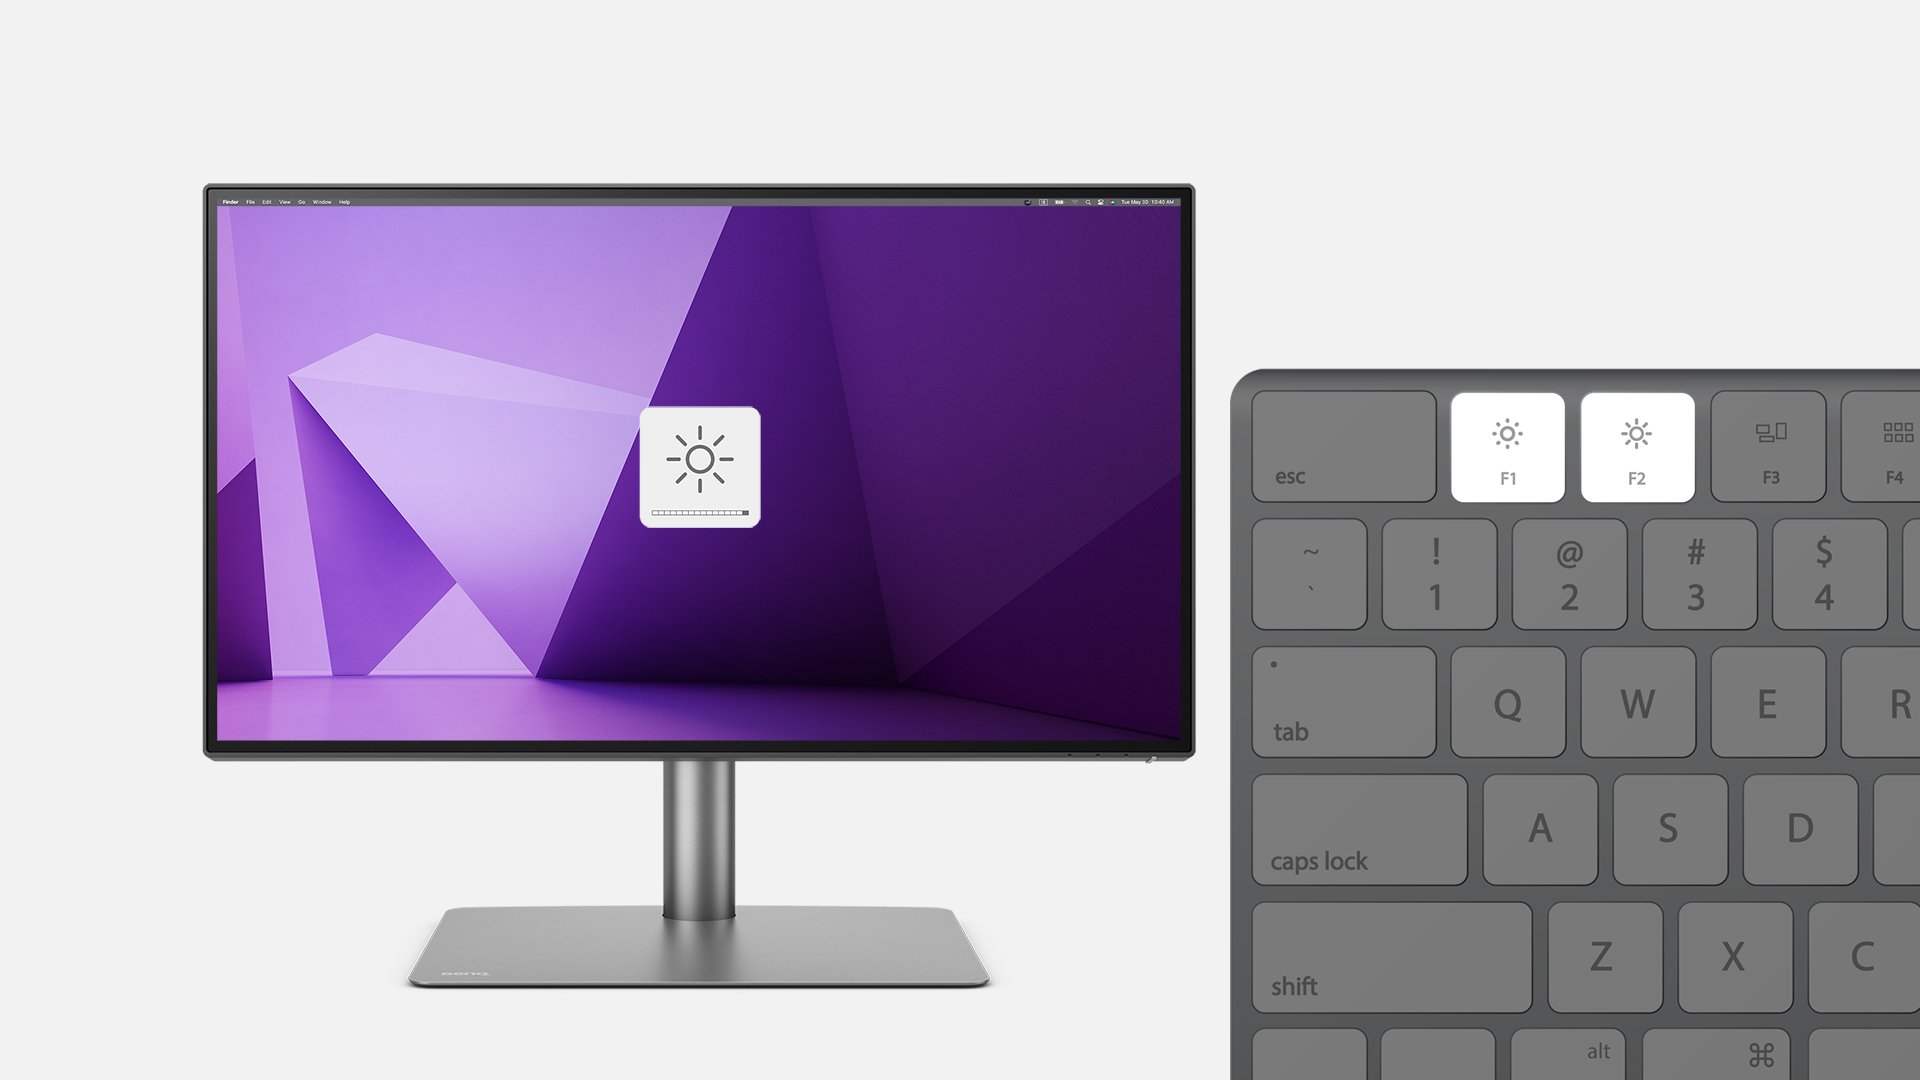 benq display pilot iccsync simplifies the process to sync the icc profile of your laptop and monitor and instantly matches the color gamut